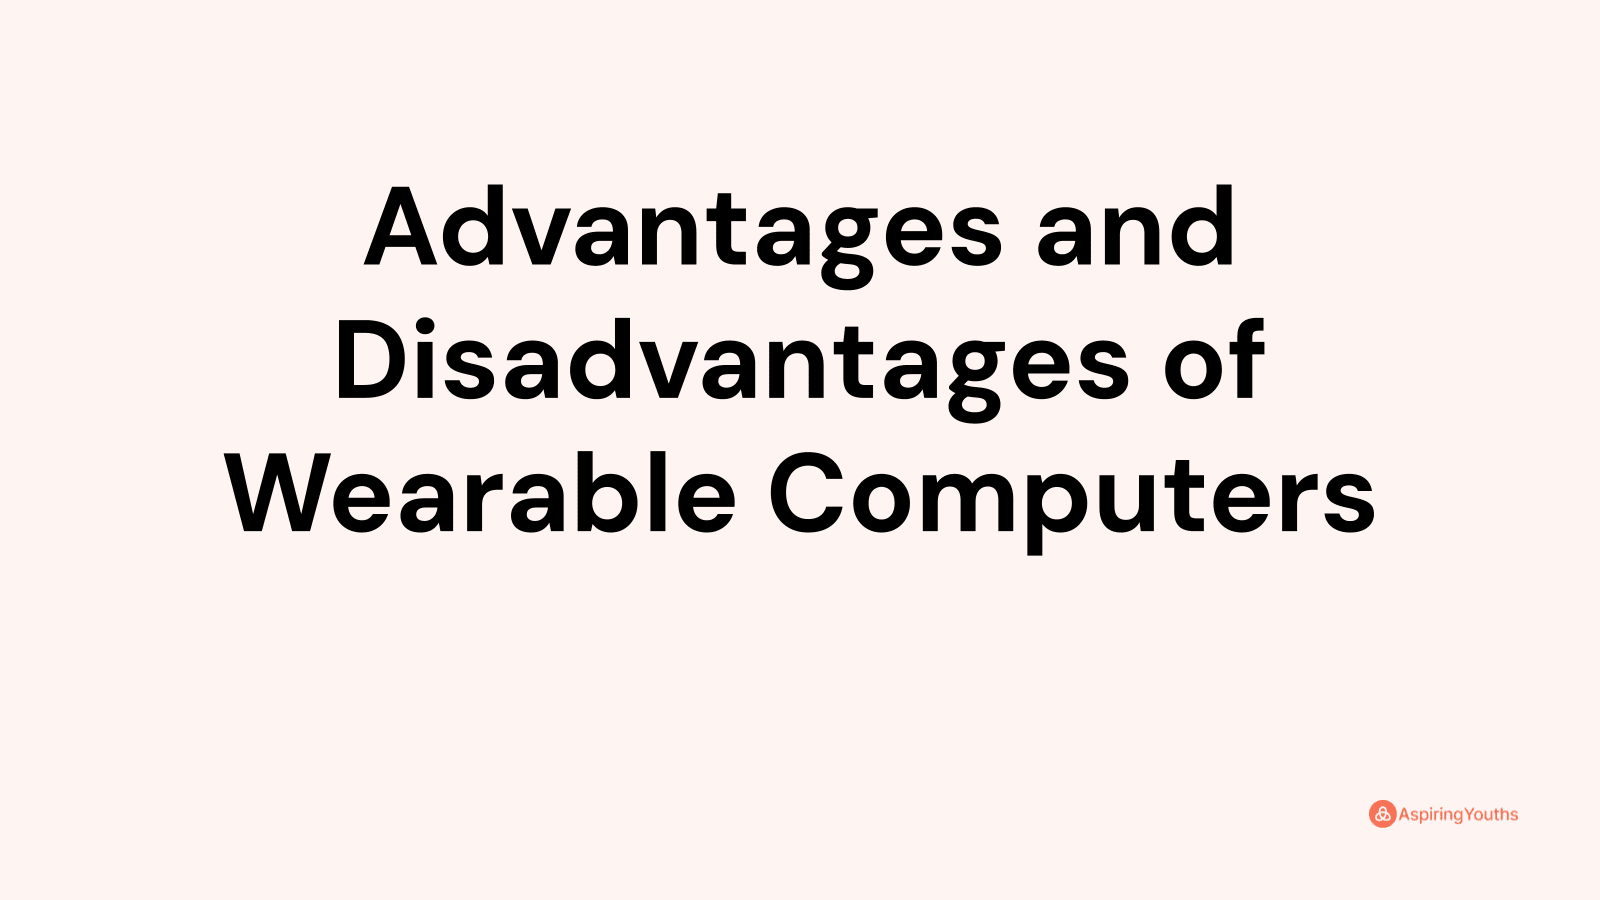 Advantages and disadvantages of Wearable Computers